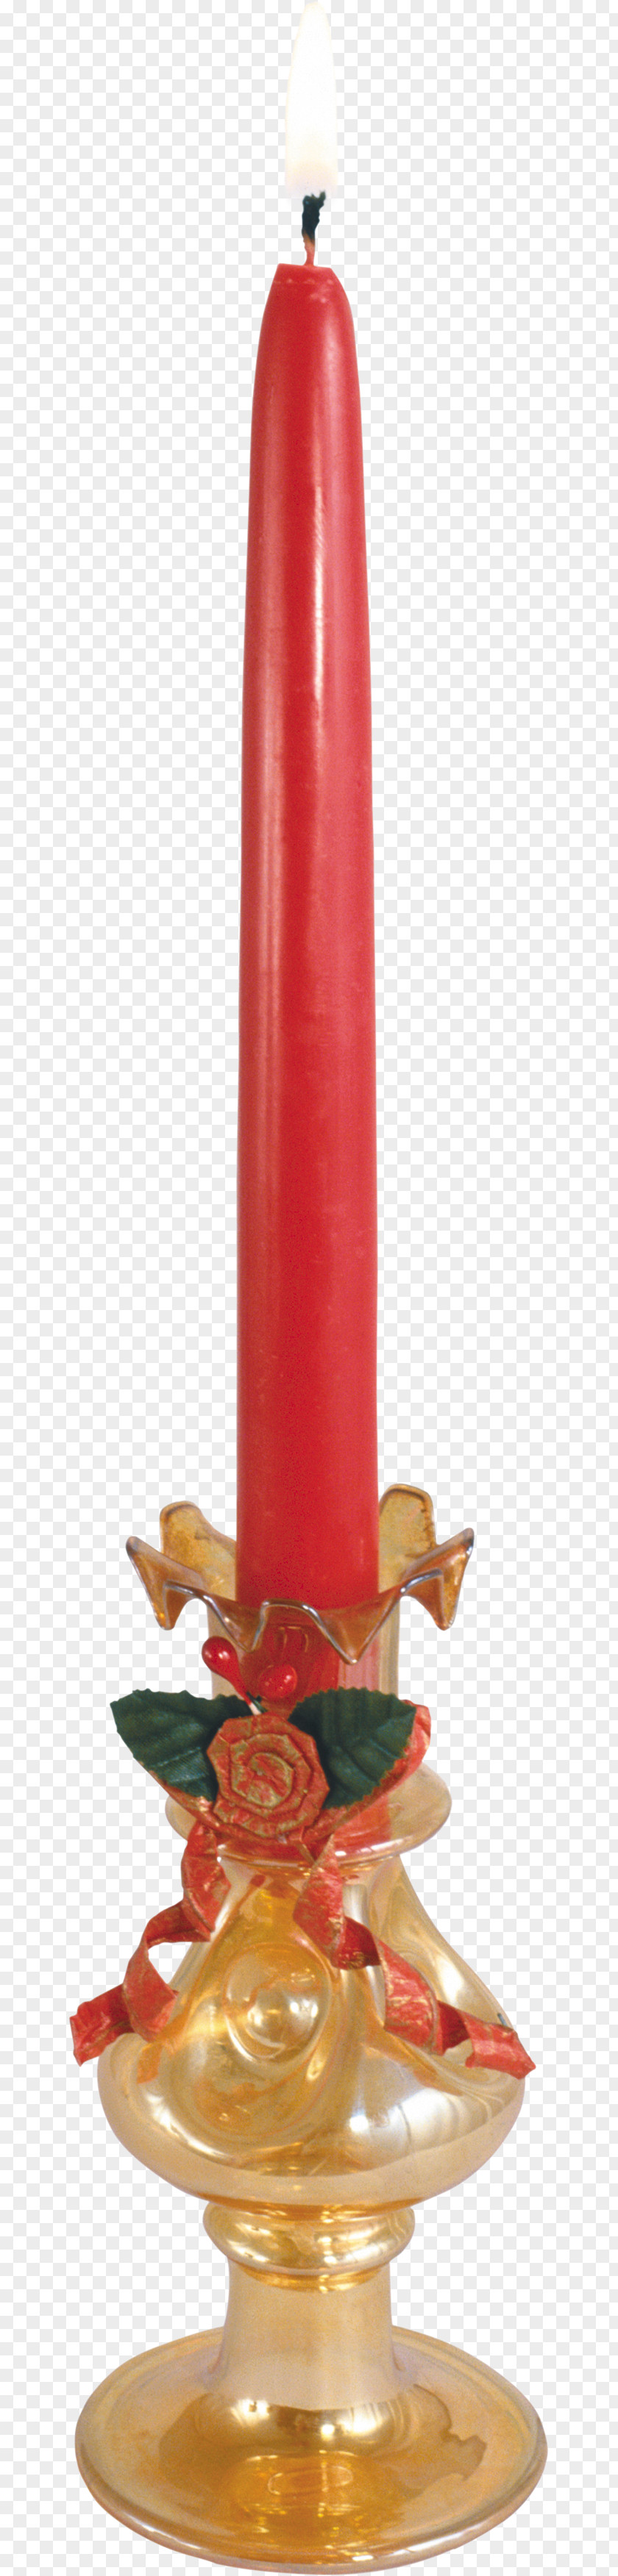 Candle Image PNG